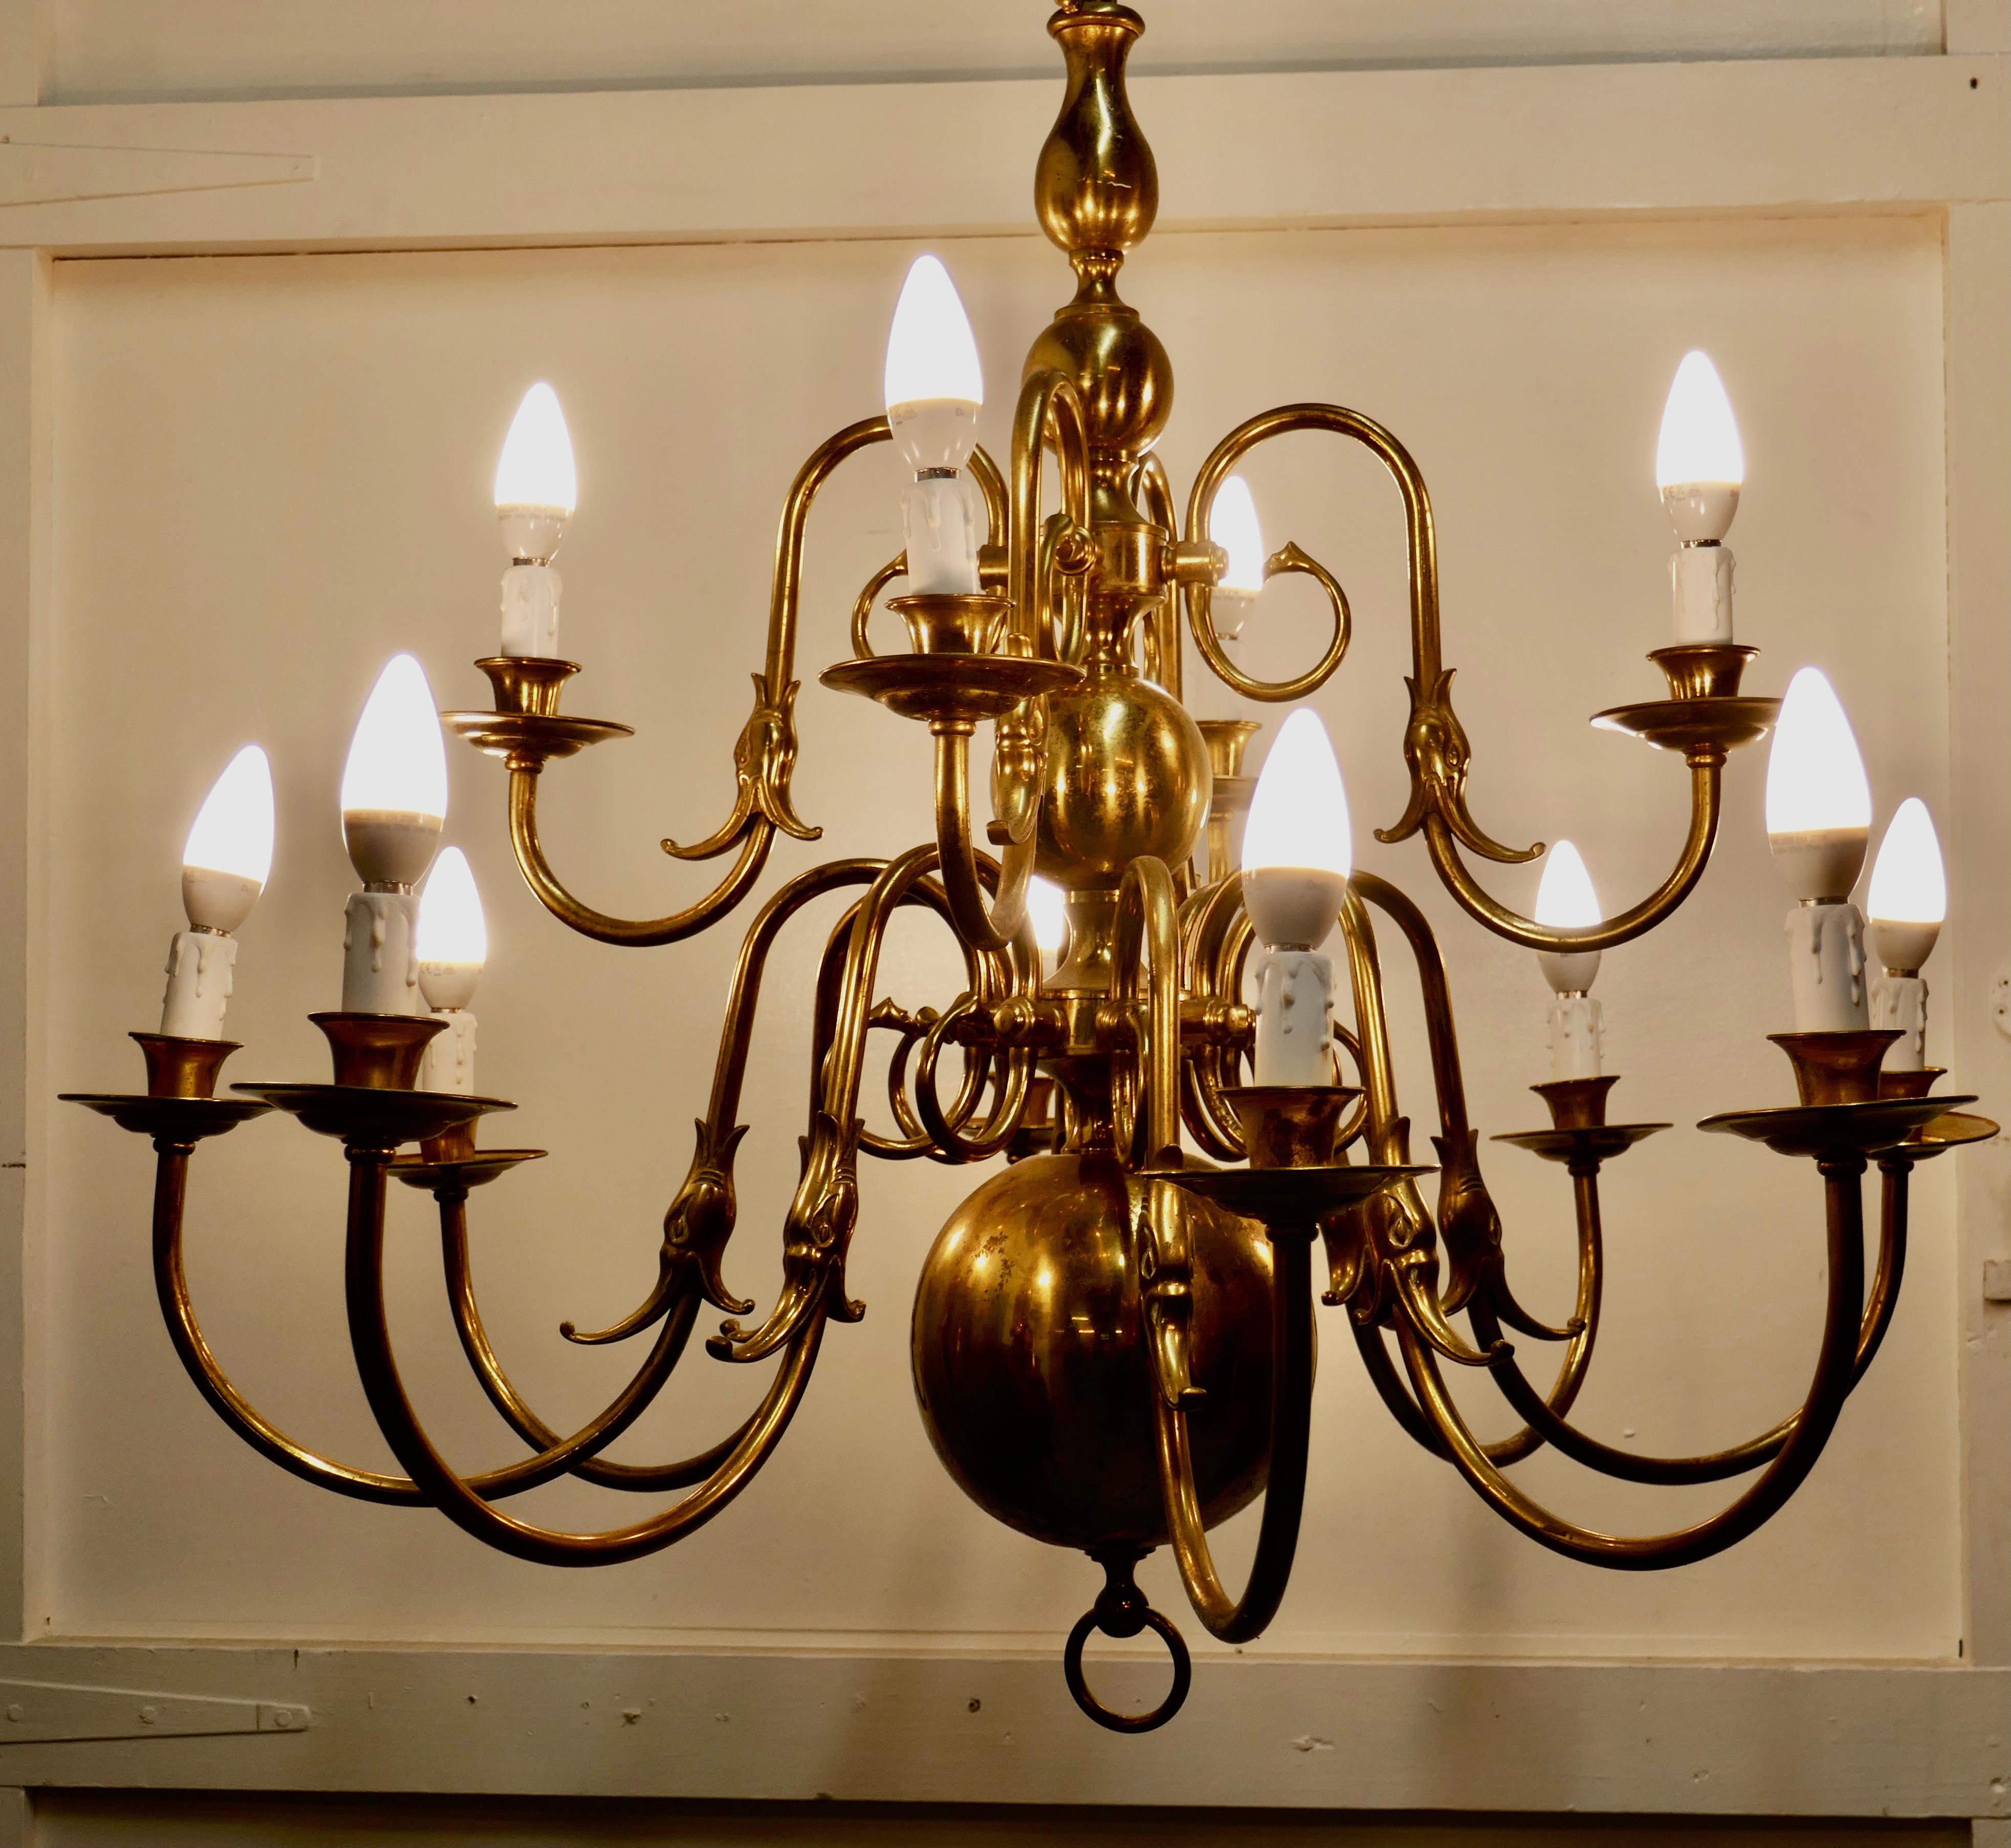 Antique Dutch style twelve branch two tier brass chandelier

This splendid large Dutch style chandelier is made in Brass with twelve upward curved stemming from a central baluster column with a large central globe. At the top of the baluster there